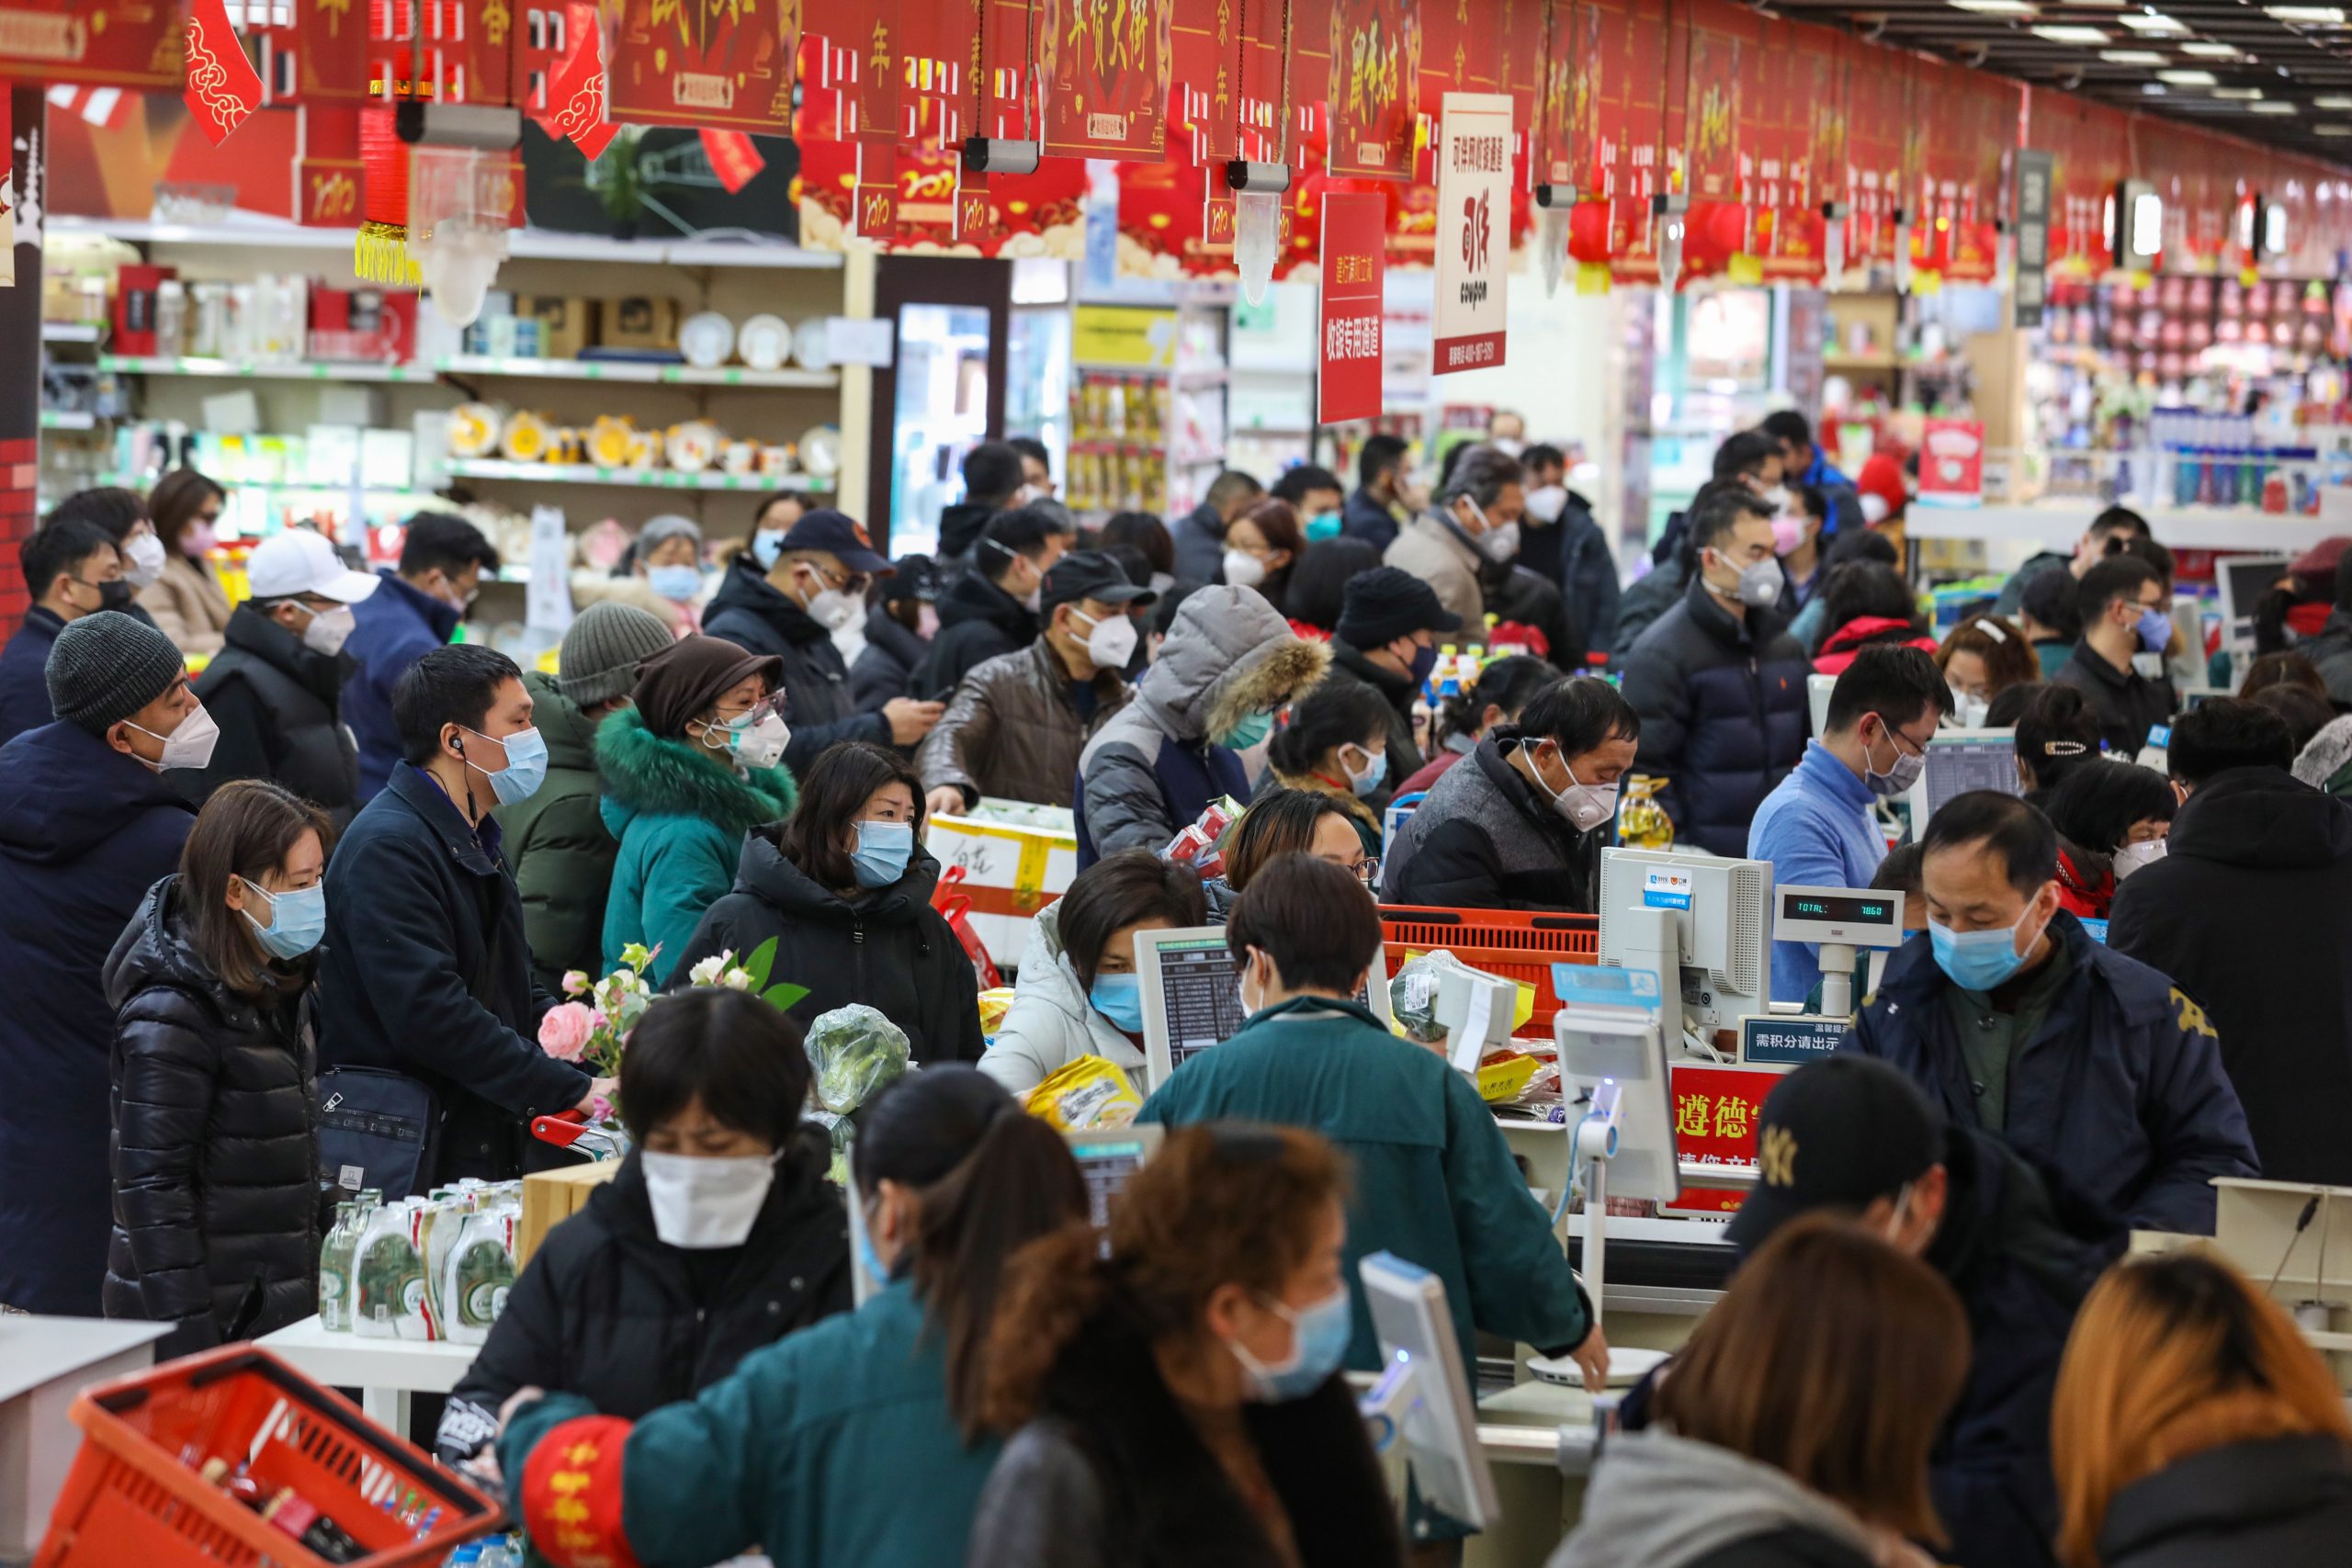 epa08163557 Shoppers wait to check out of a supermarket in Wuhan in central China's Hubei province 25 January 2020. The city struck by the 2019-nCoV virus will ban private traffic starting on Sunday, prompting citizens to a shopping spree of necessities and groceries.  EPA/YUAN ZHENG CHINA OUT